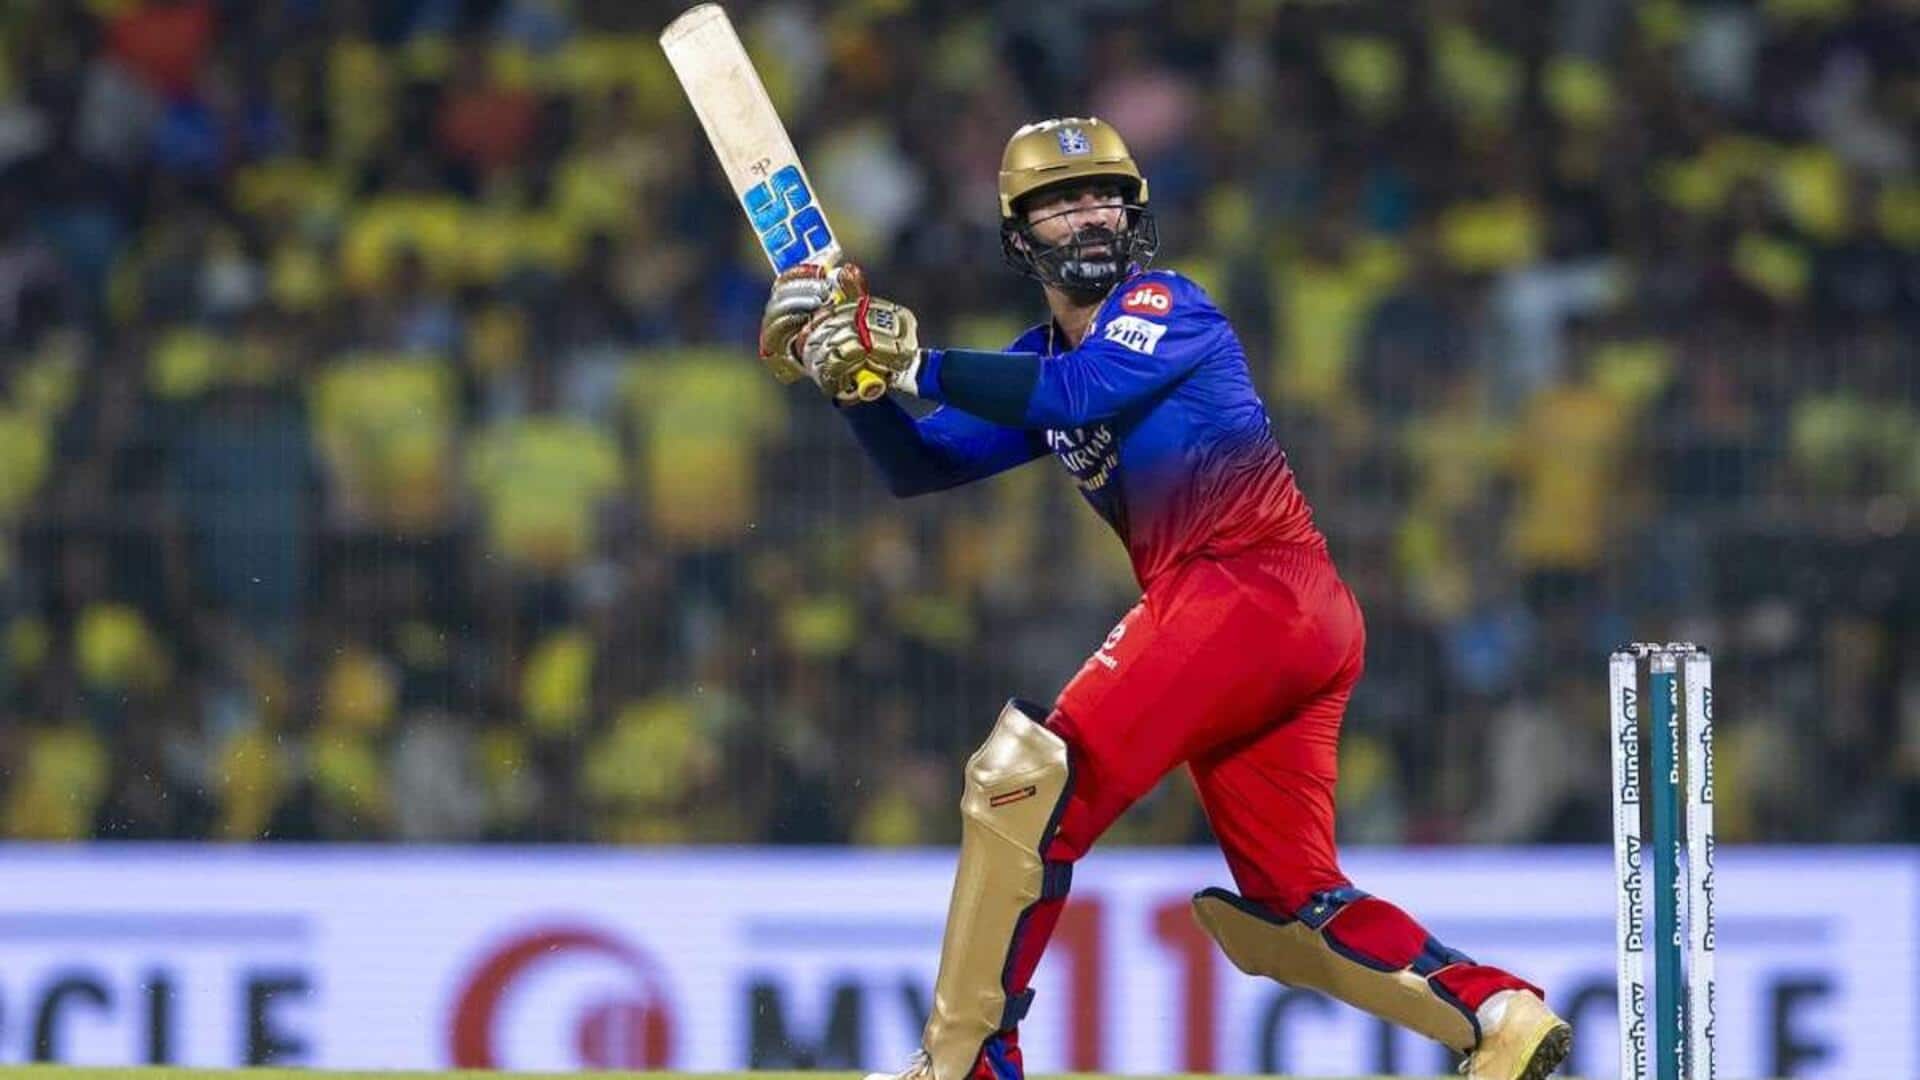 Notable records and stats of Dinesh Karthik in IPL 